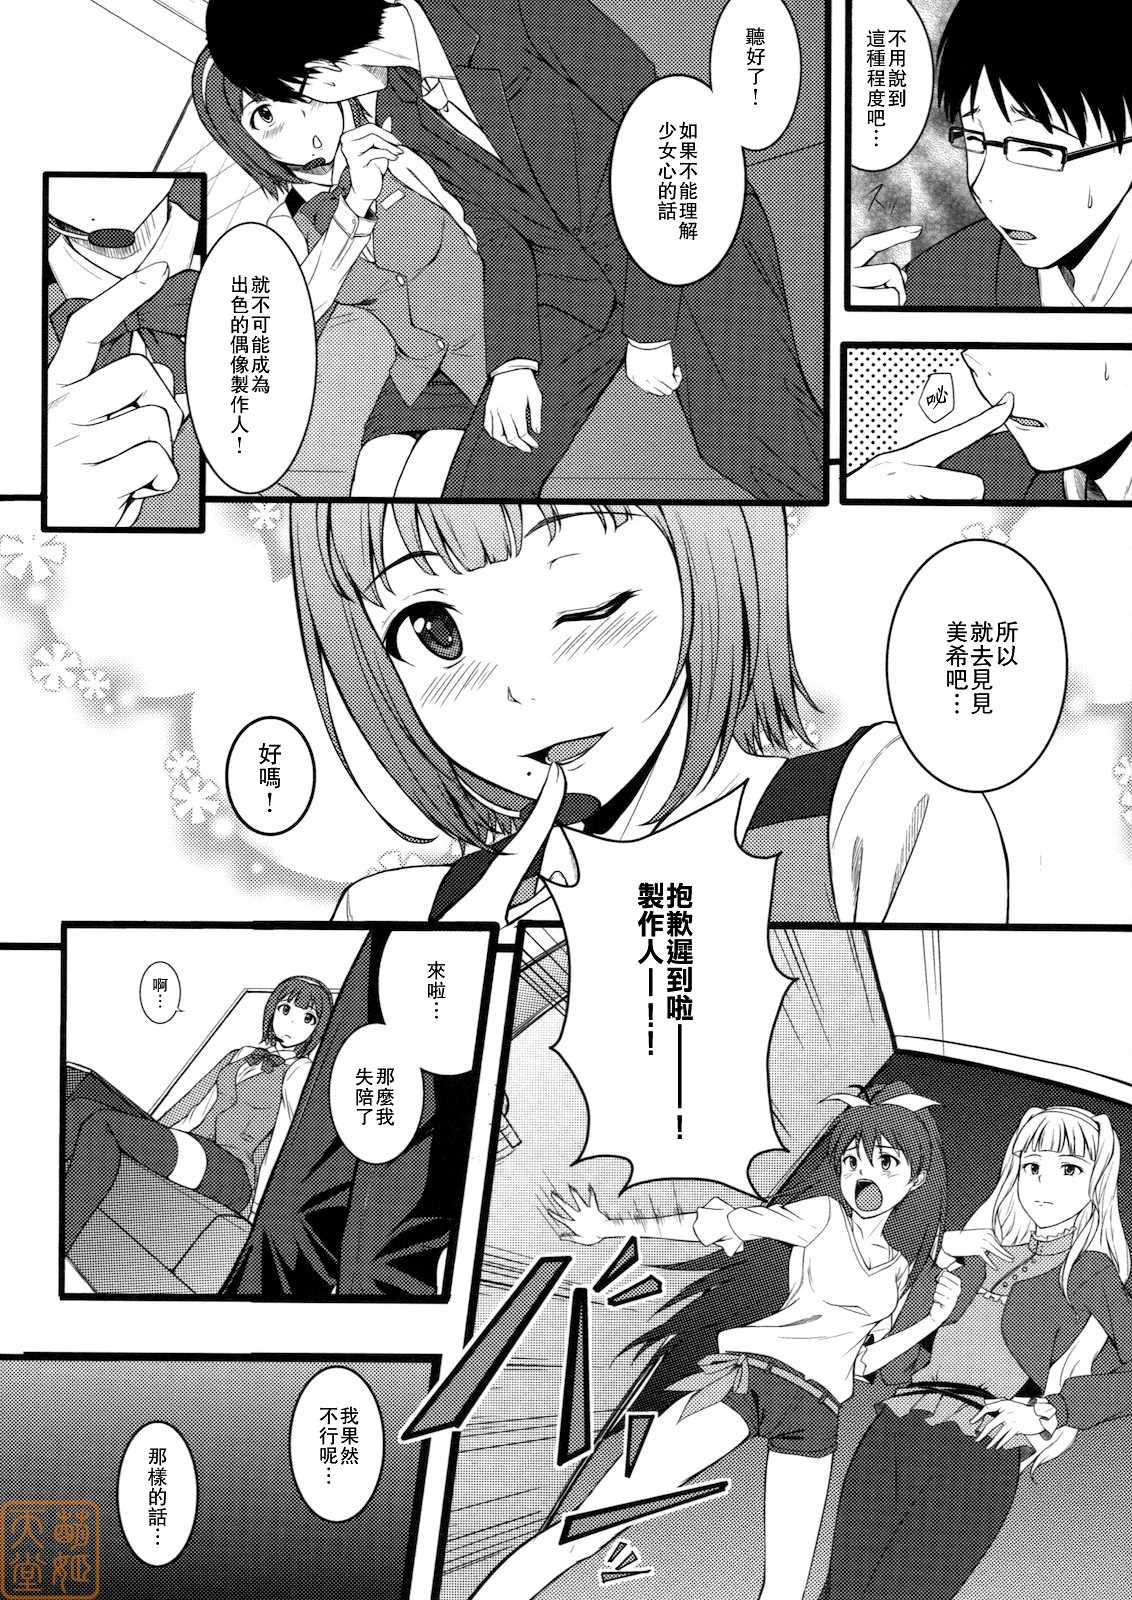 (C79) [Count2.4 (Nishi)] Continuation (THE iDOLM@STER) [Chinese] [MoeHimeHeaven][V2] (C79) [Count2.4 (弐肆)] CONTINUATION (アイマス) [中文翻譯]